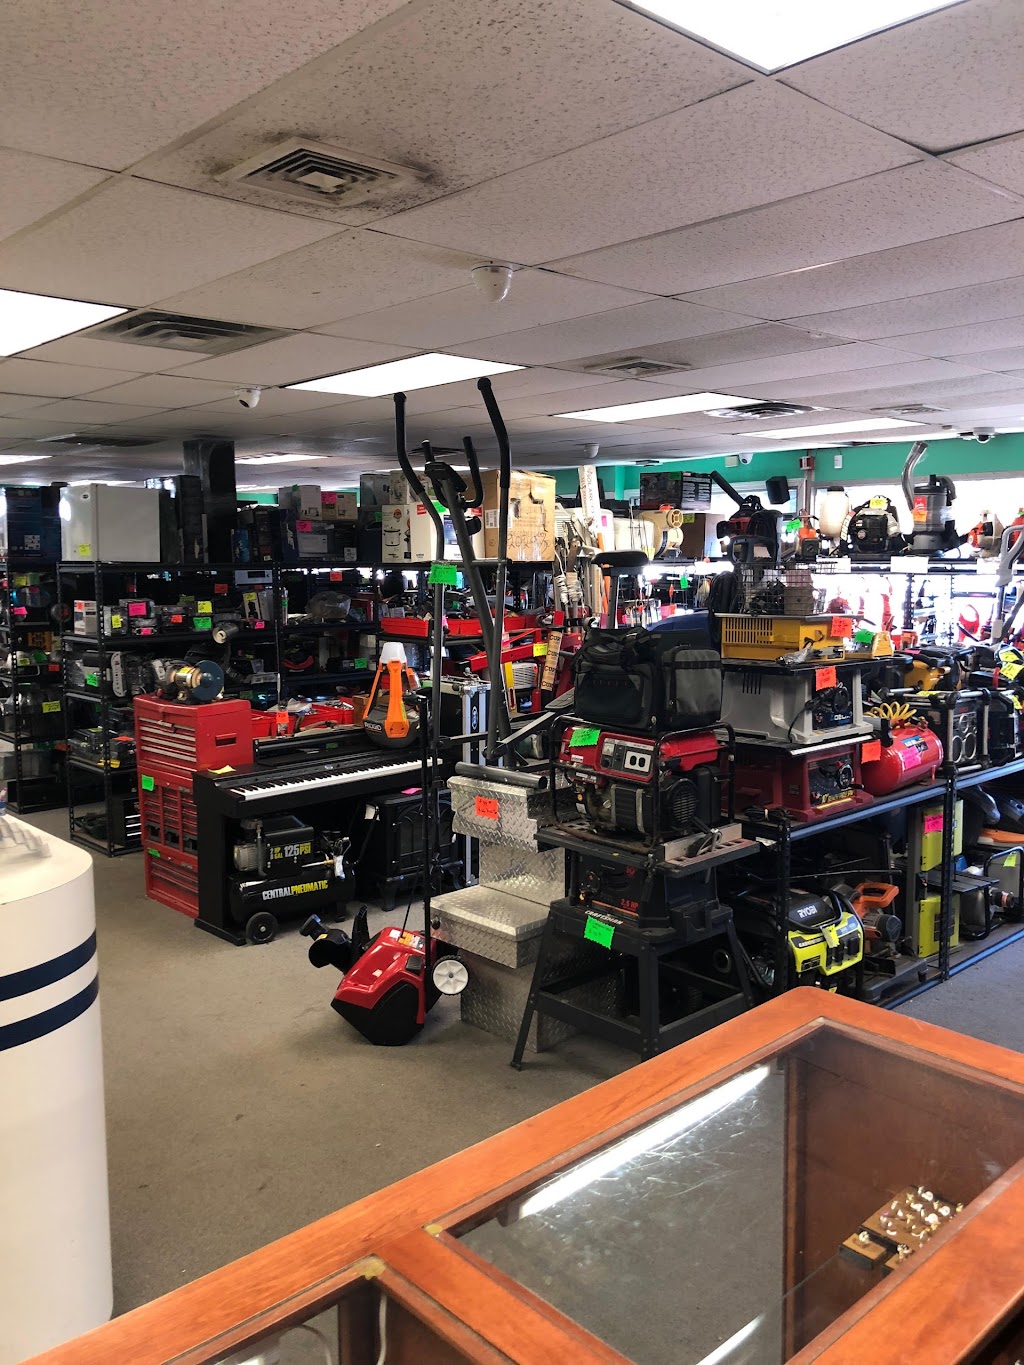 Silas Deane Pawn Shop Wethersfield | 249 Silas Deane Hwy, Wethersfield, CT 06109 | Phone: (860) 436-4244